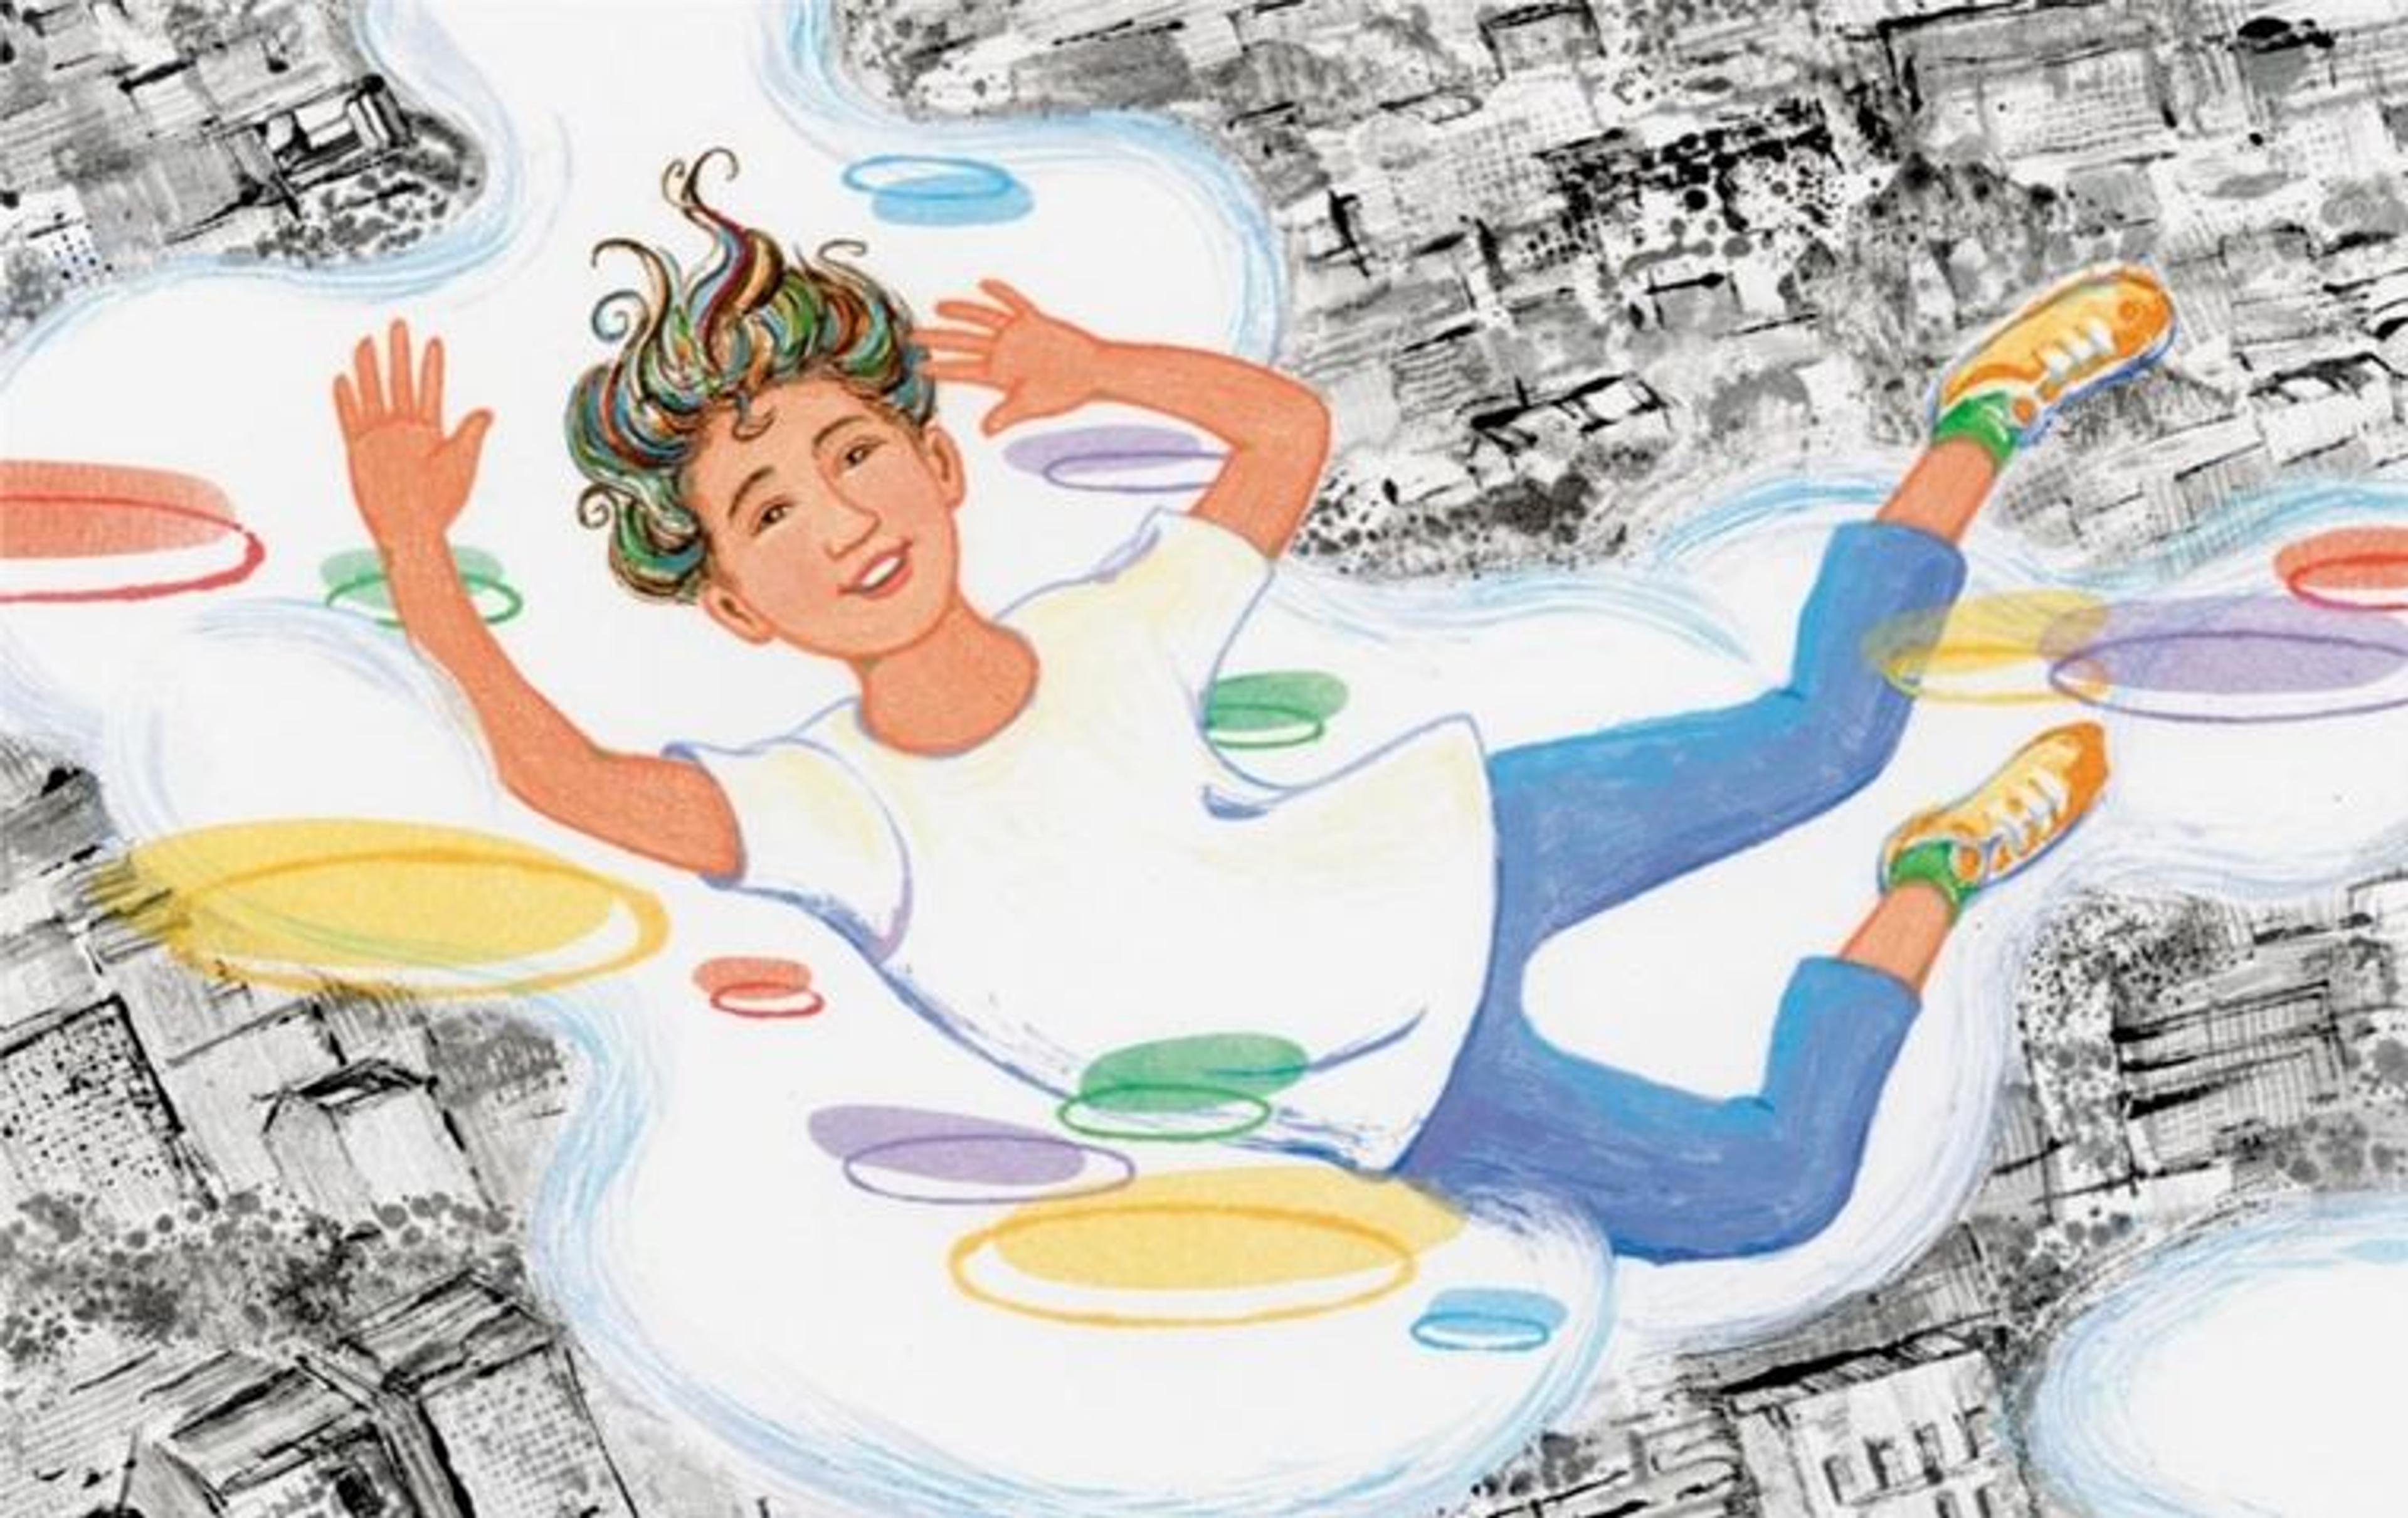 Detail of an illustration of a young girl in a white shirt and blue pants flying through the sky in a horizontal position. Beside her are clouds and various multi-colored oval shapes and in the distance is a black-and-white cityscape seen from above.